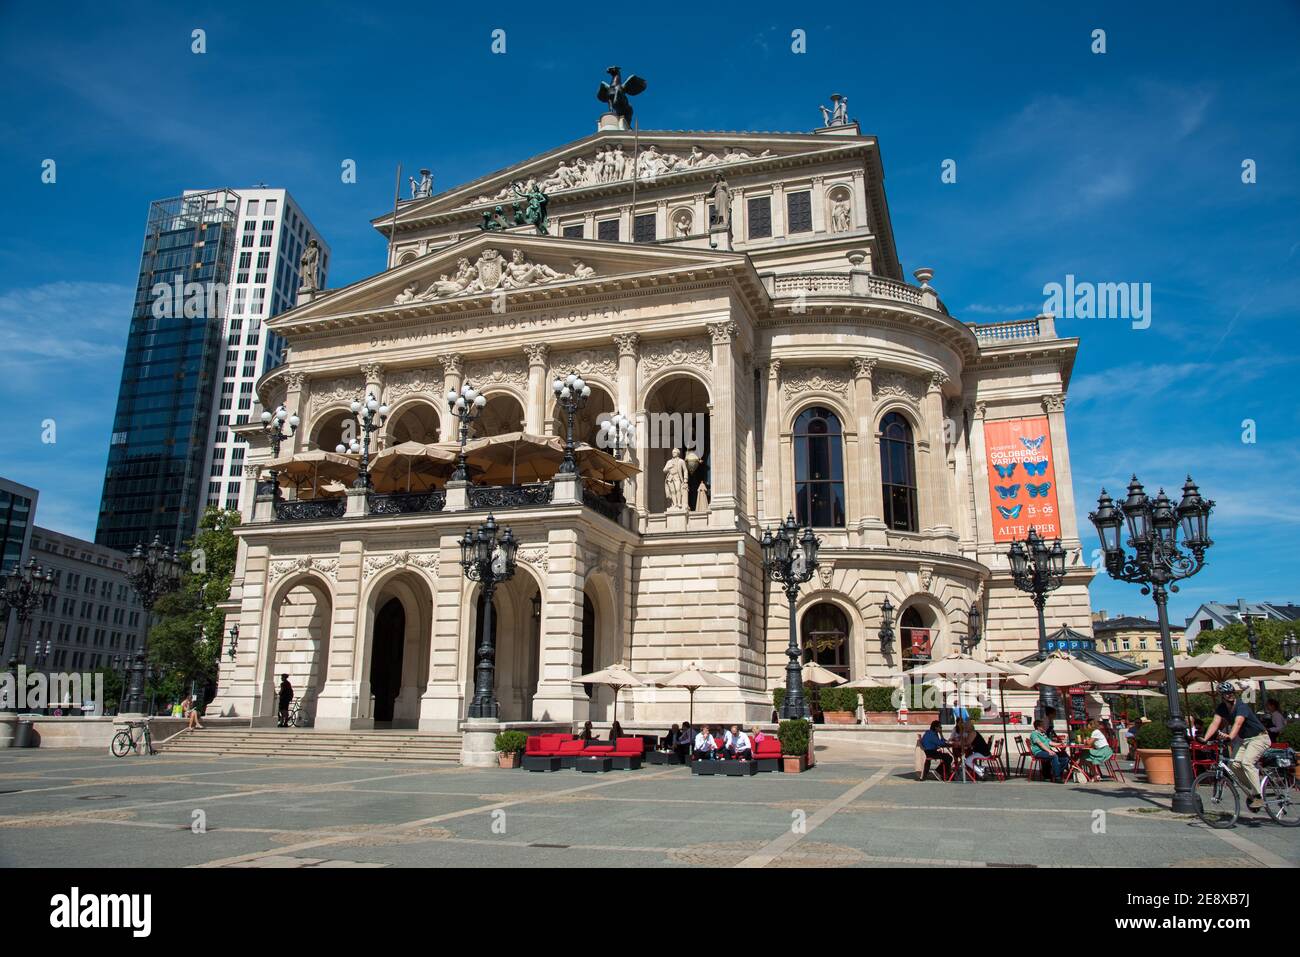 Alter oper or opera square with people moving around in Frankfu Stock Photo